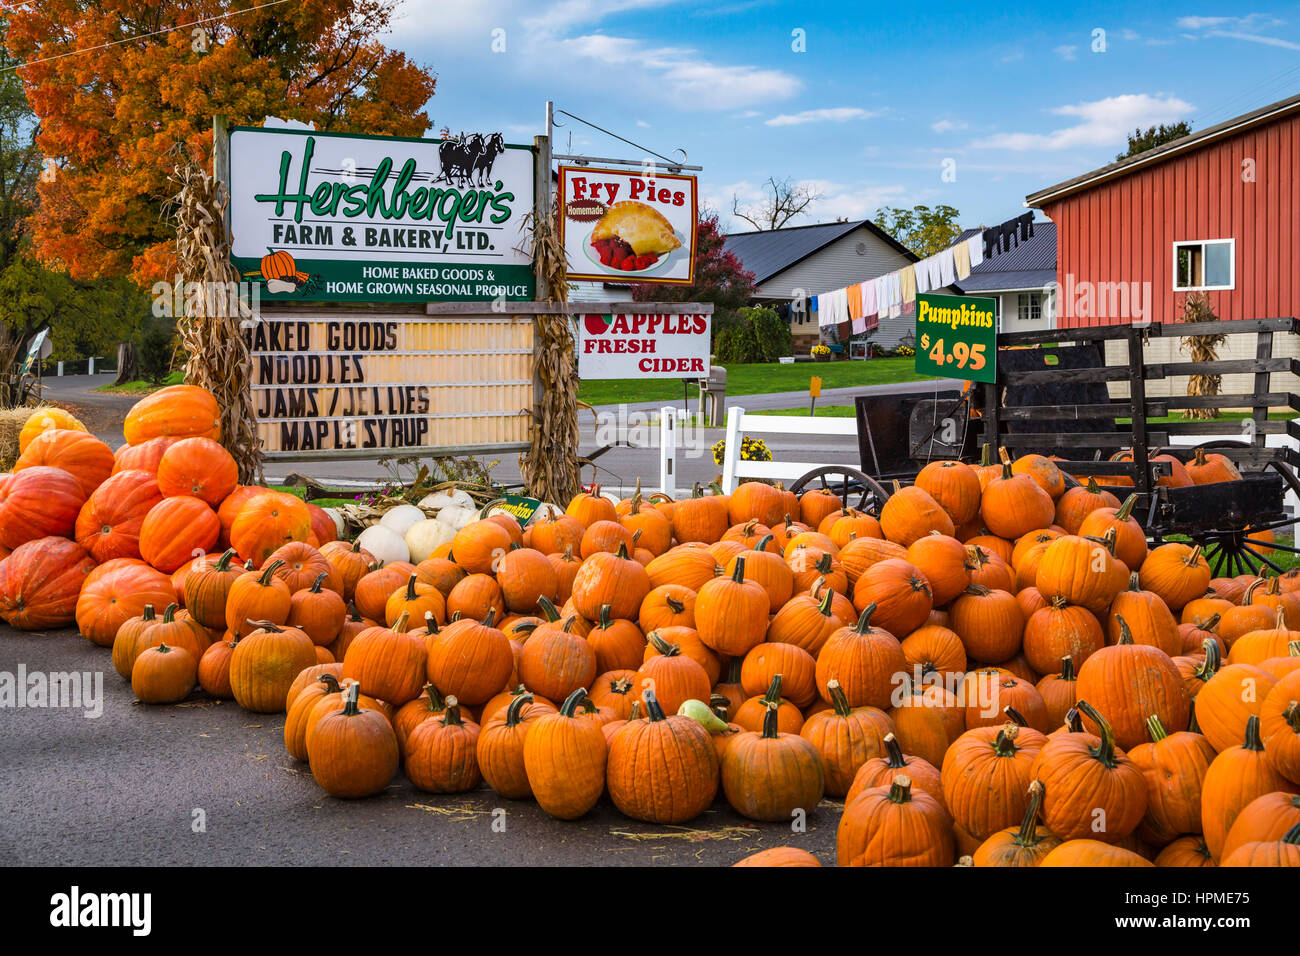 The Hershberger's Farm and Bakery near Millersburg, Ohio, USA. Stock Photo